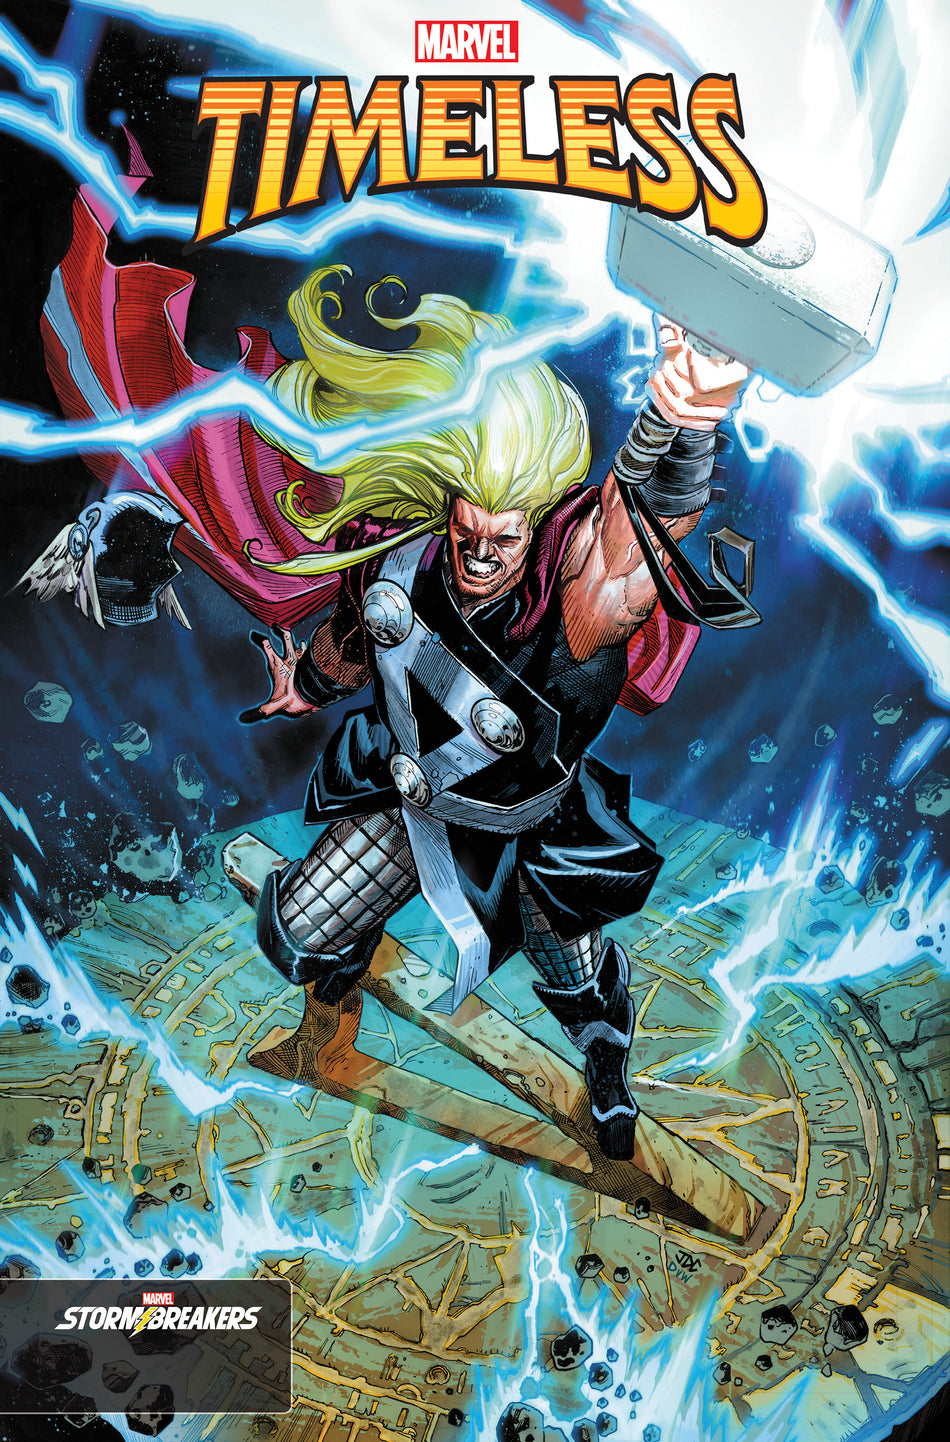 Image of Timeless 1 Cassara Stormbreakers Variant comic sold by Stronghold Collectibles.